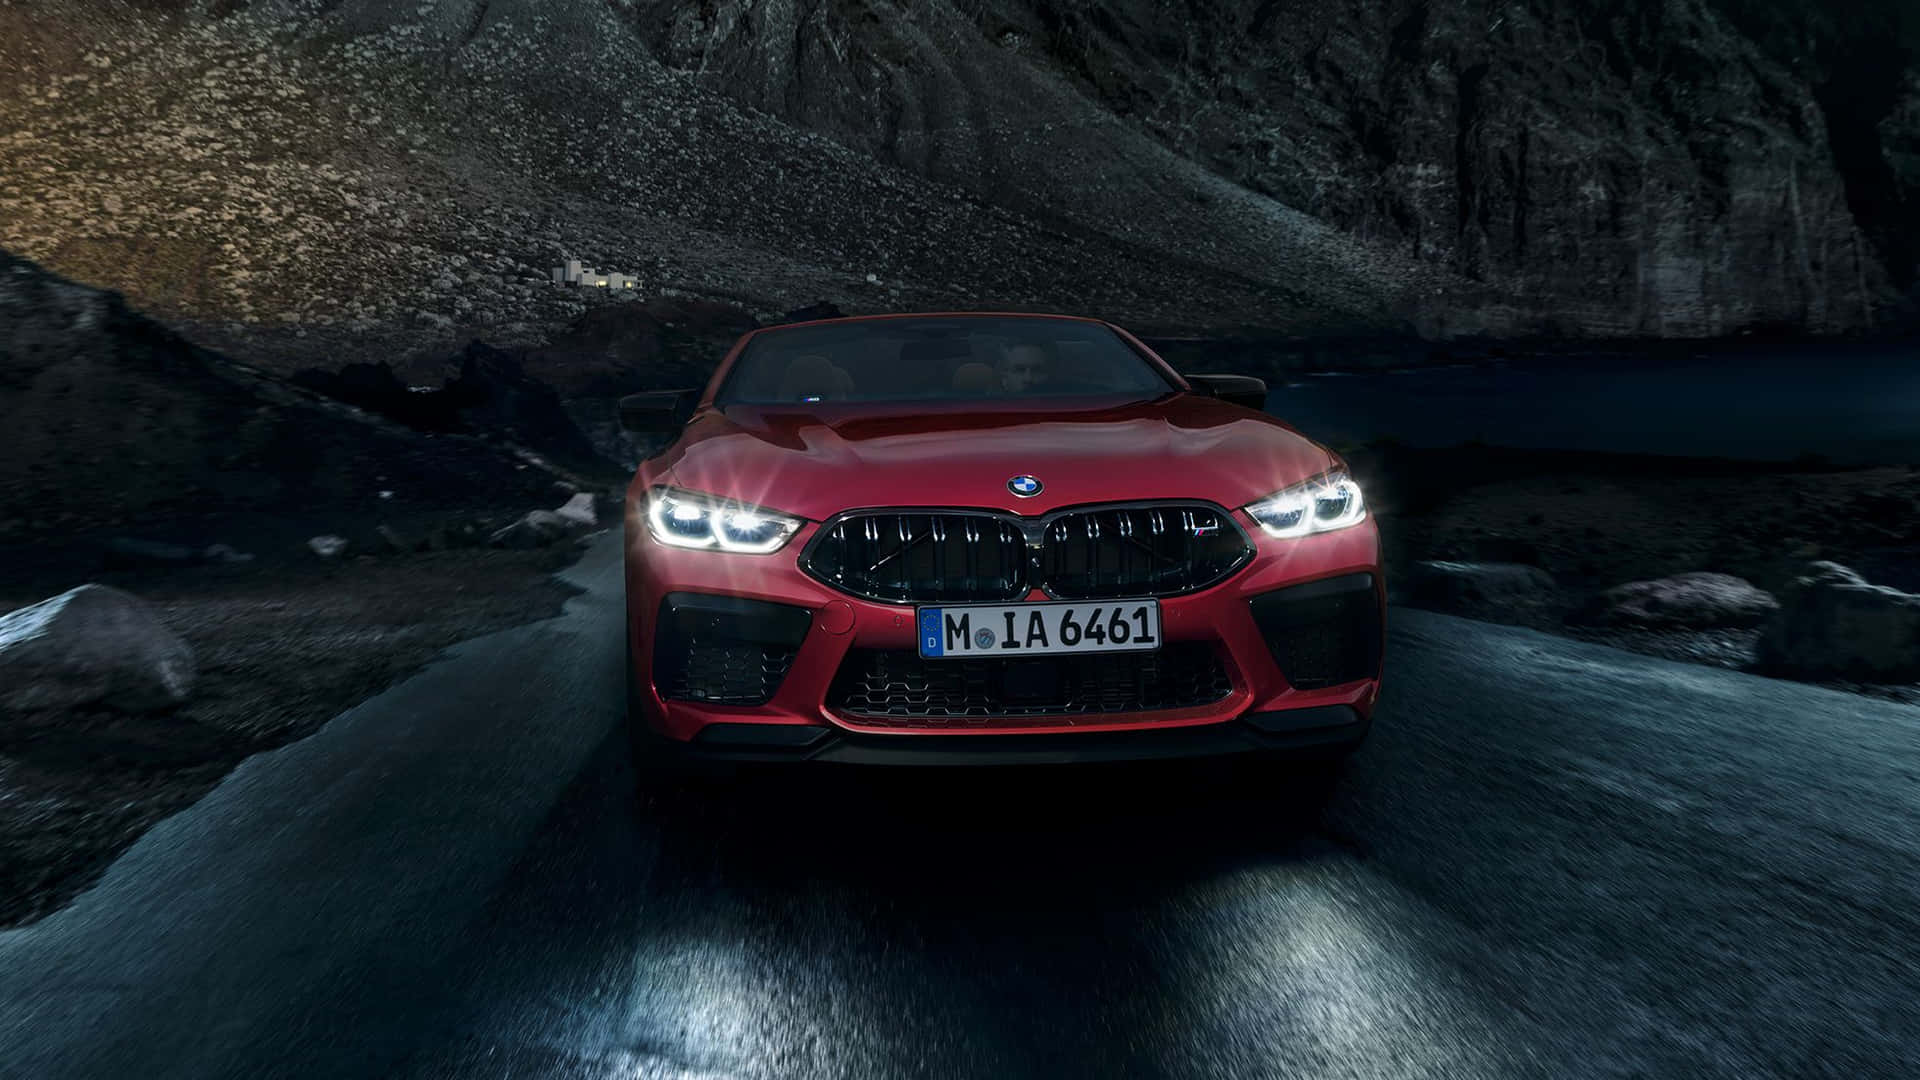 Showing off the sleek styling of BMW's M8 series Wallpaper